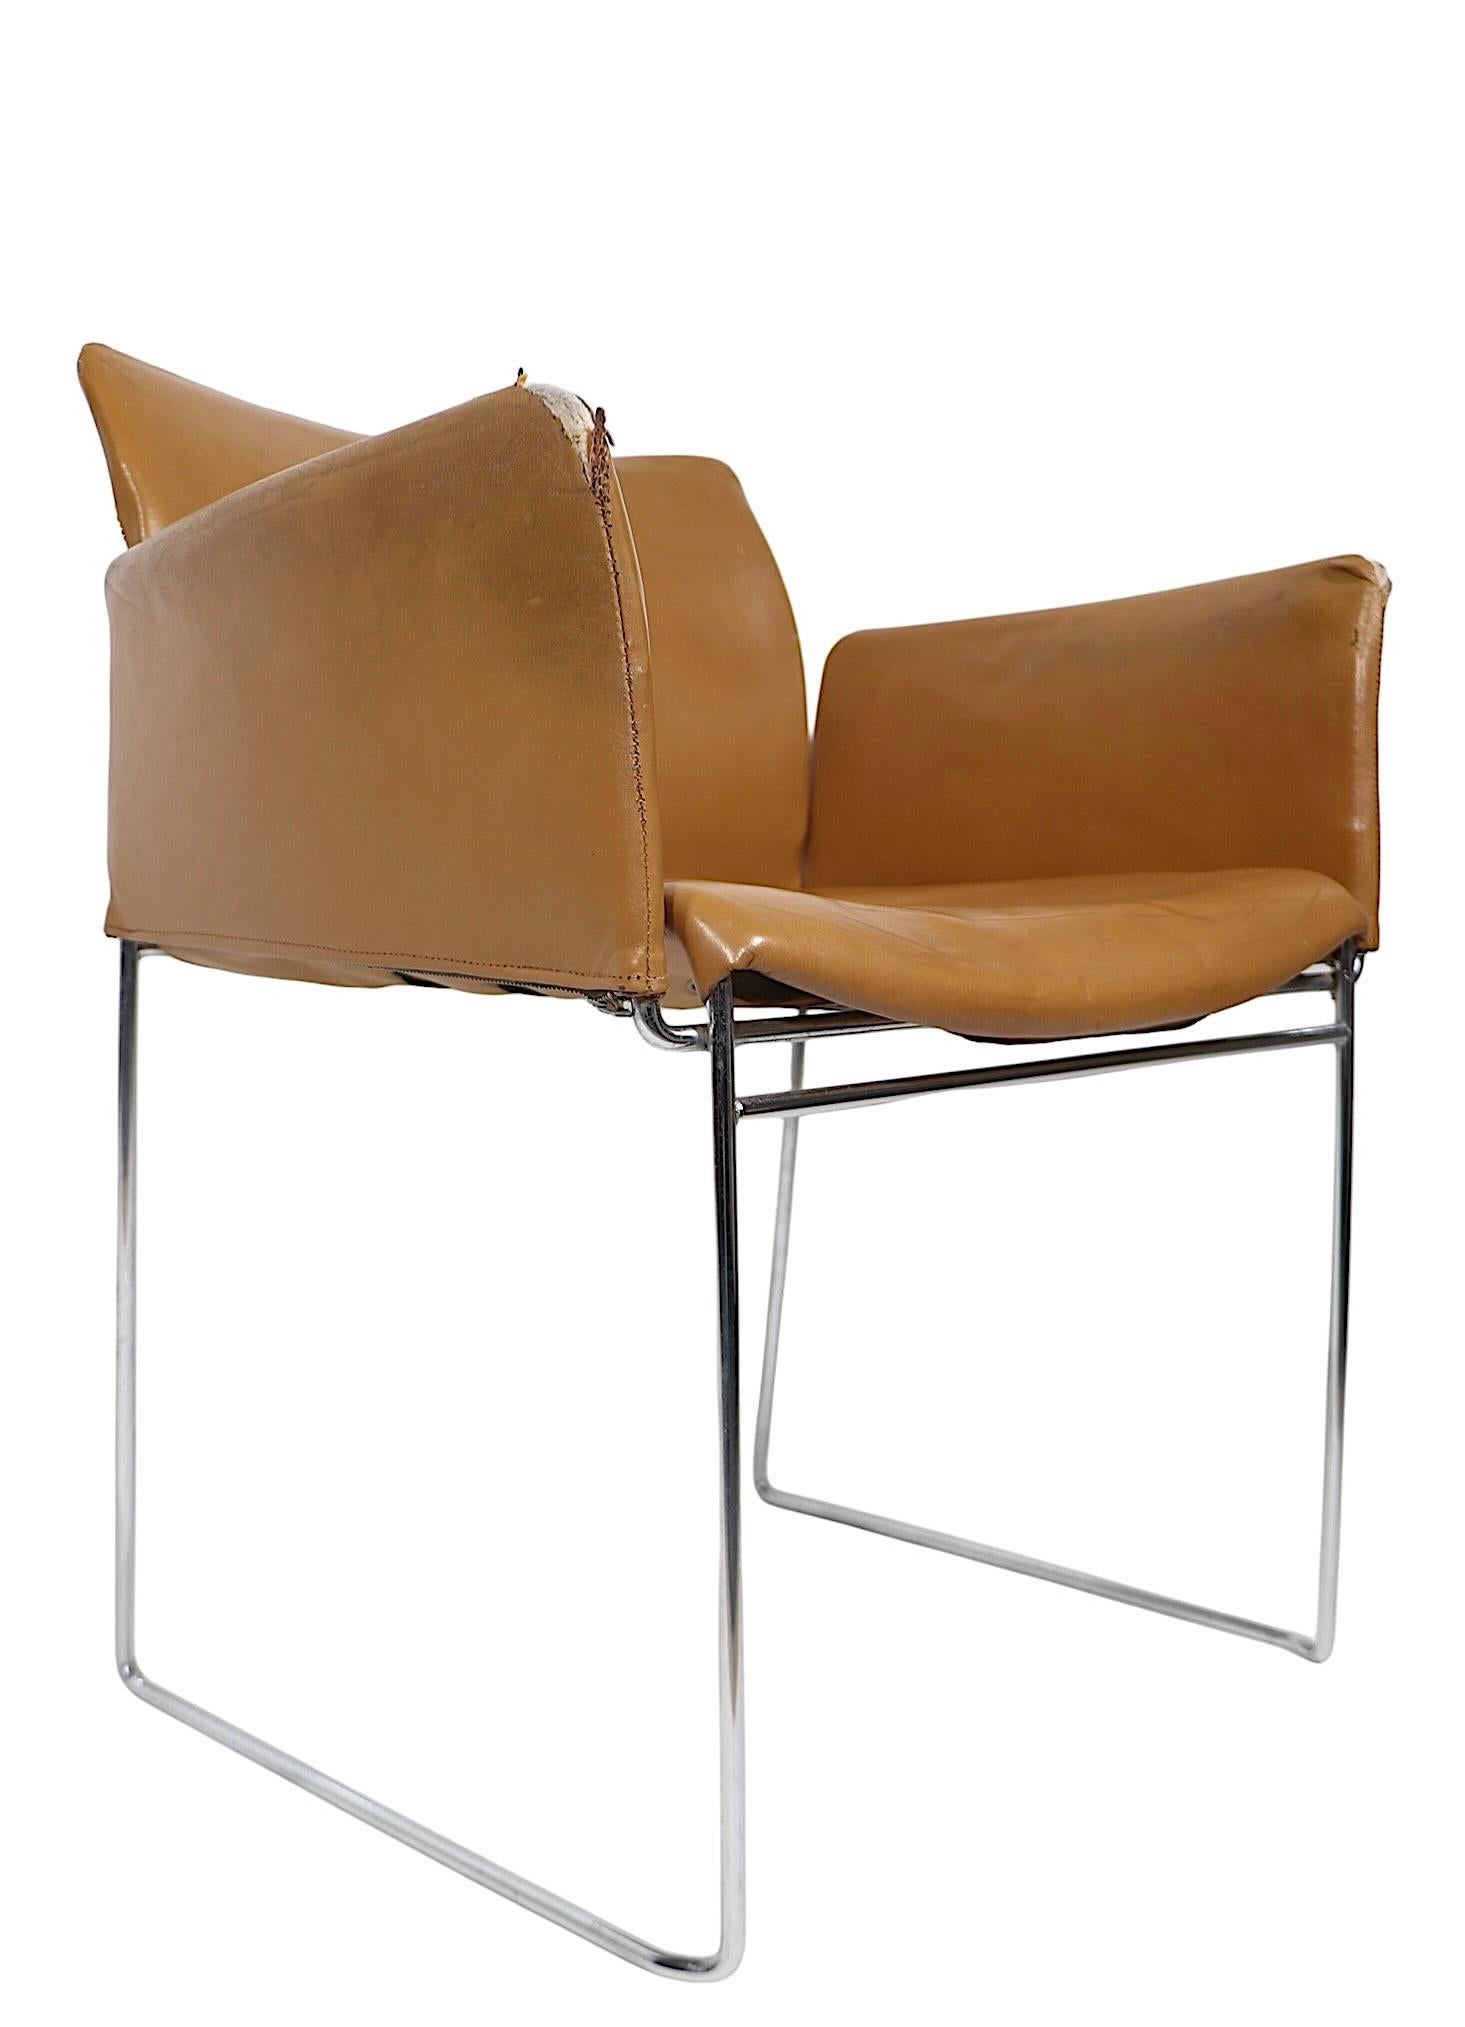 Set of Four Chrome and Leather Dining Chairs by Gavina c 1960/1980's For Sale 4